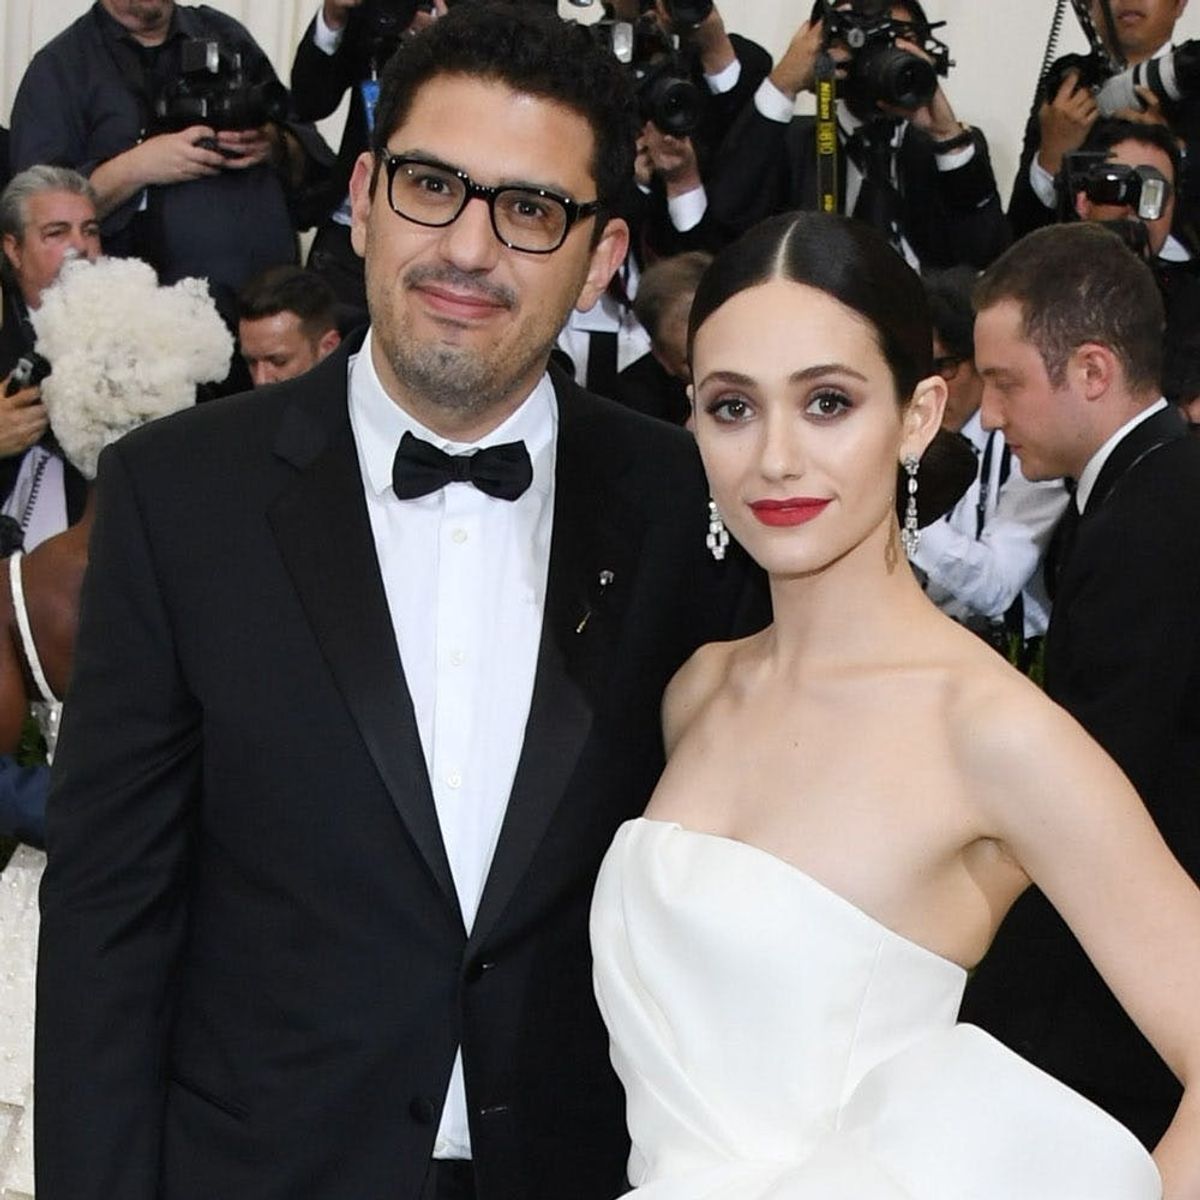 Emmy Rossum’s Latest Candid Wedding Snaps Are Picture-Perfect